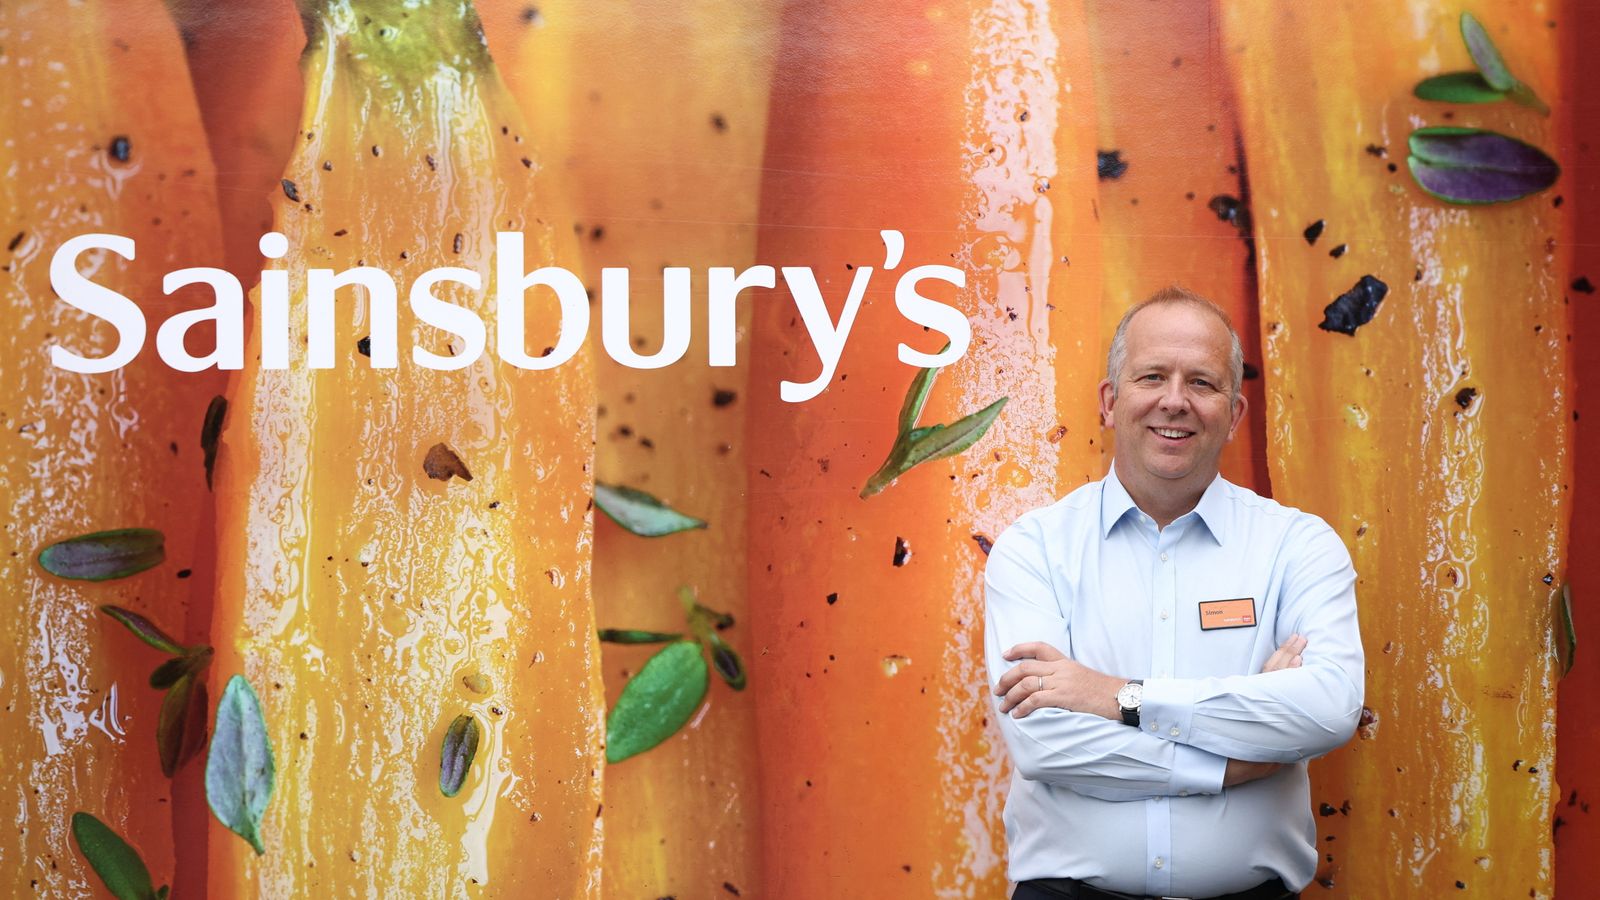 Sainsbury's 'winning over shoppers from rivals' as profits rise higher than expected